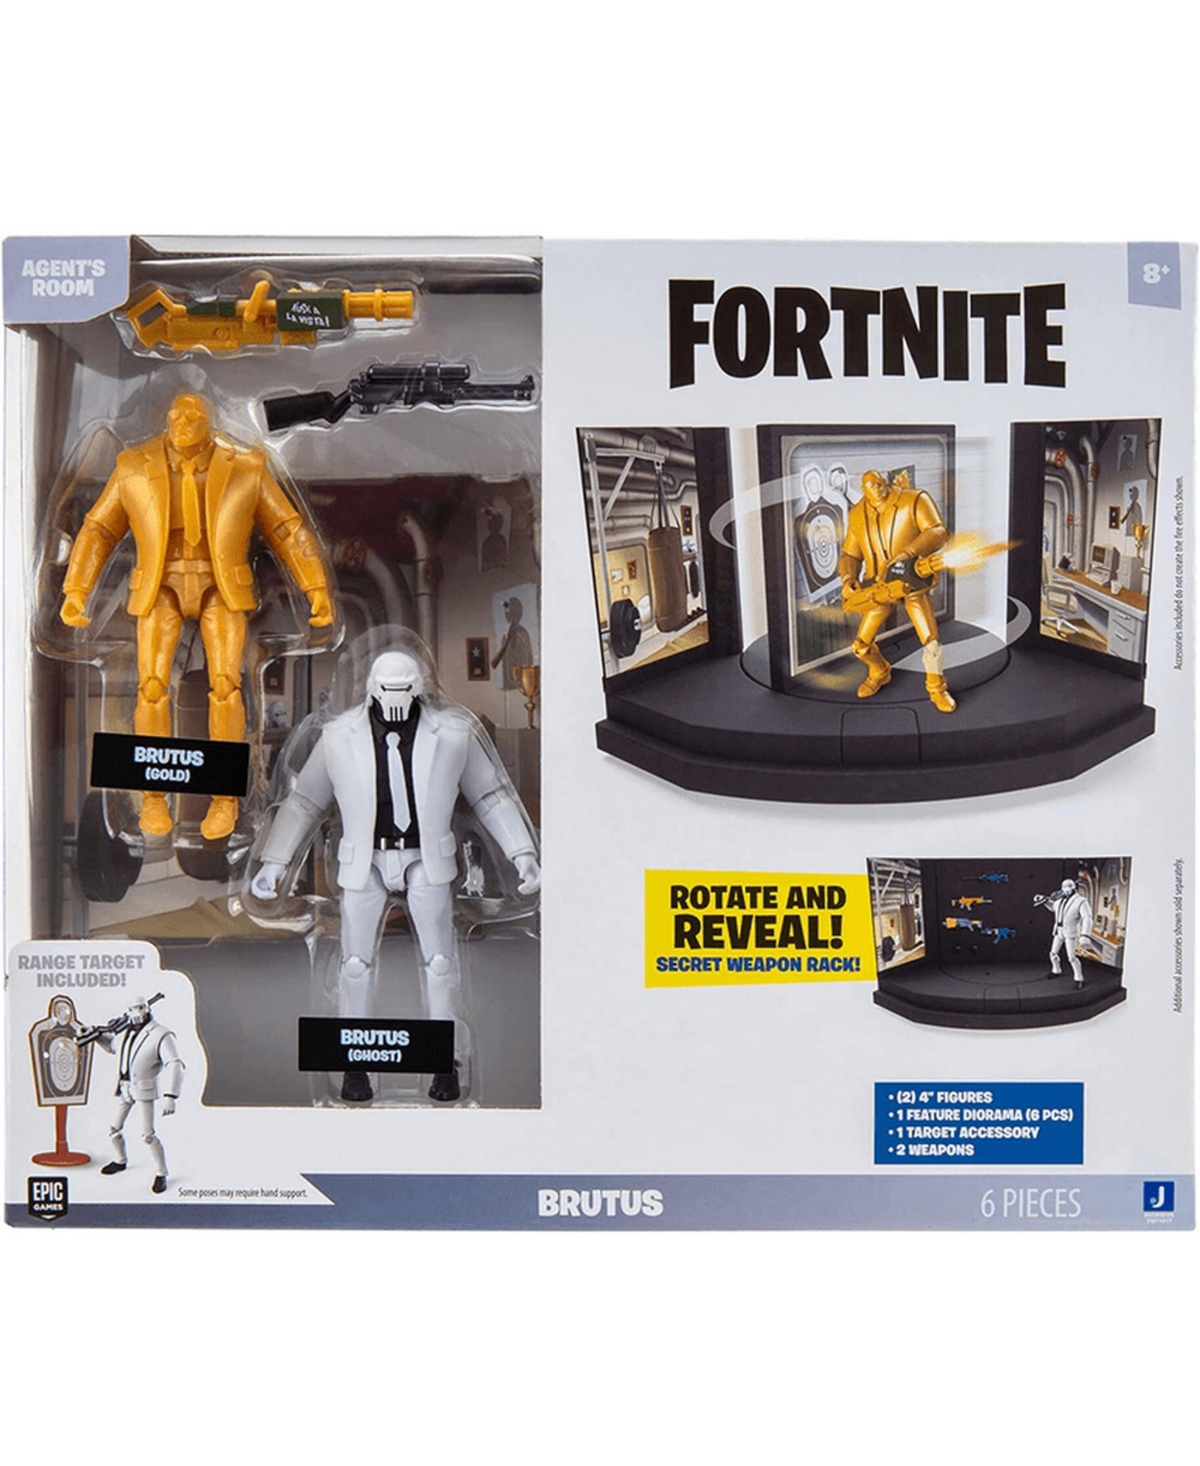 Fortnite 2 Figure Pack Agent's Room Brutus In White,yellow